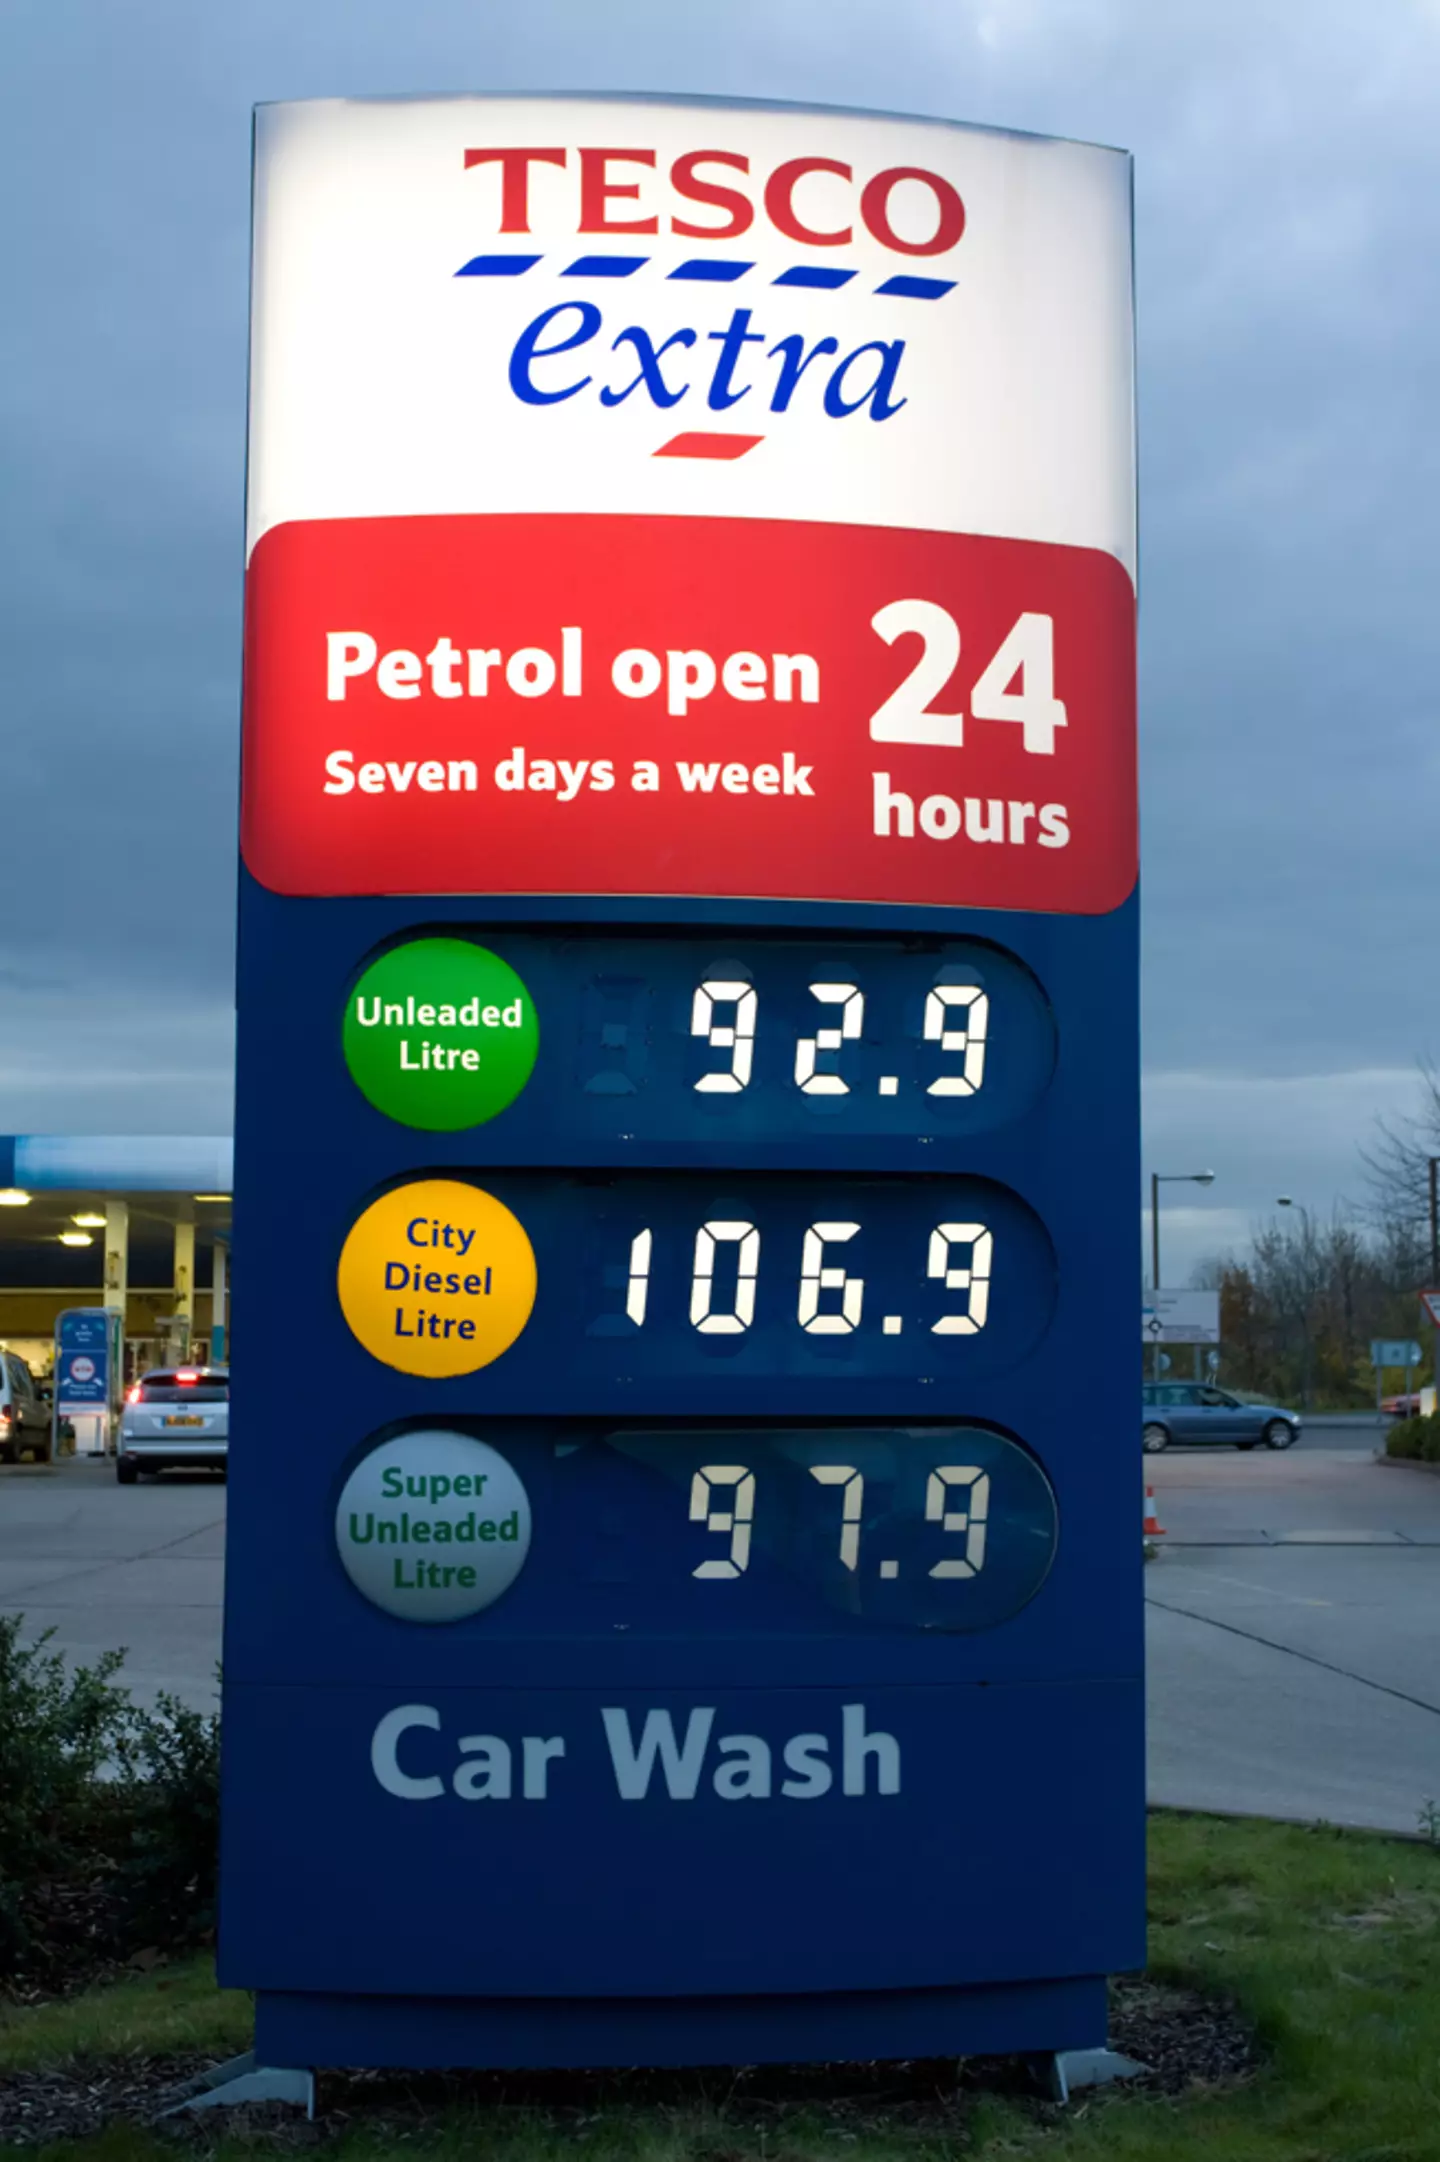 Tesco have issued a warning over petrol rules.